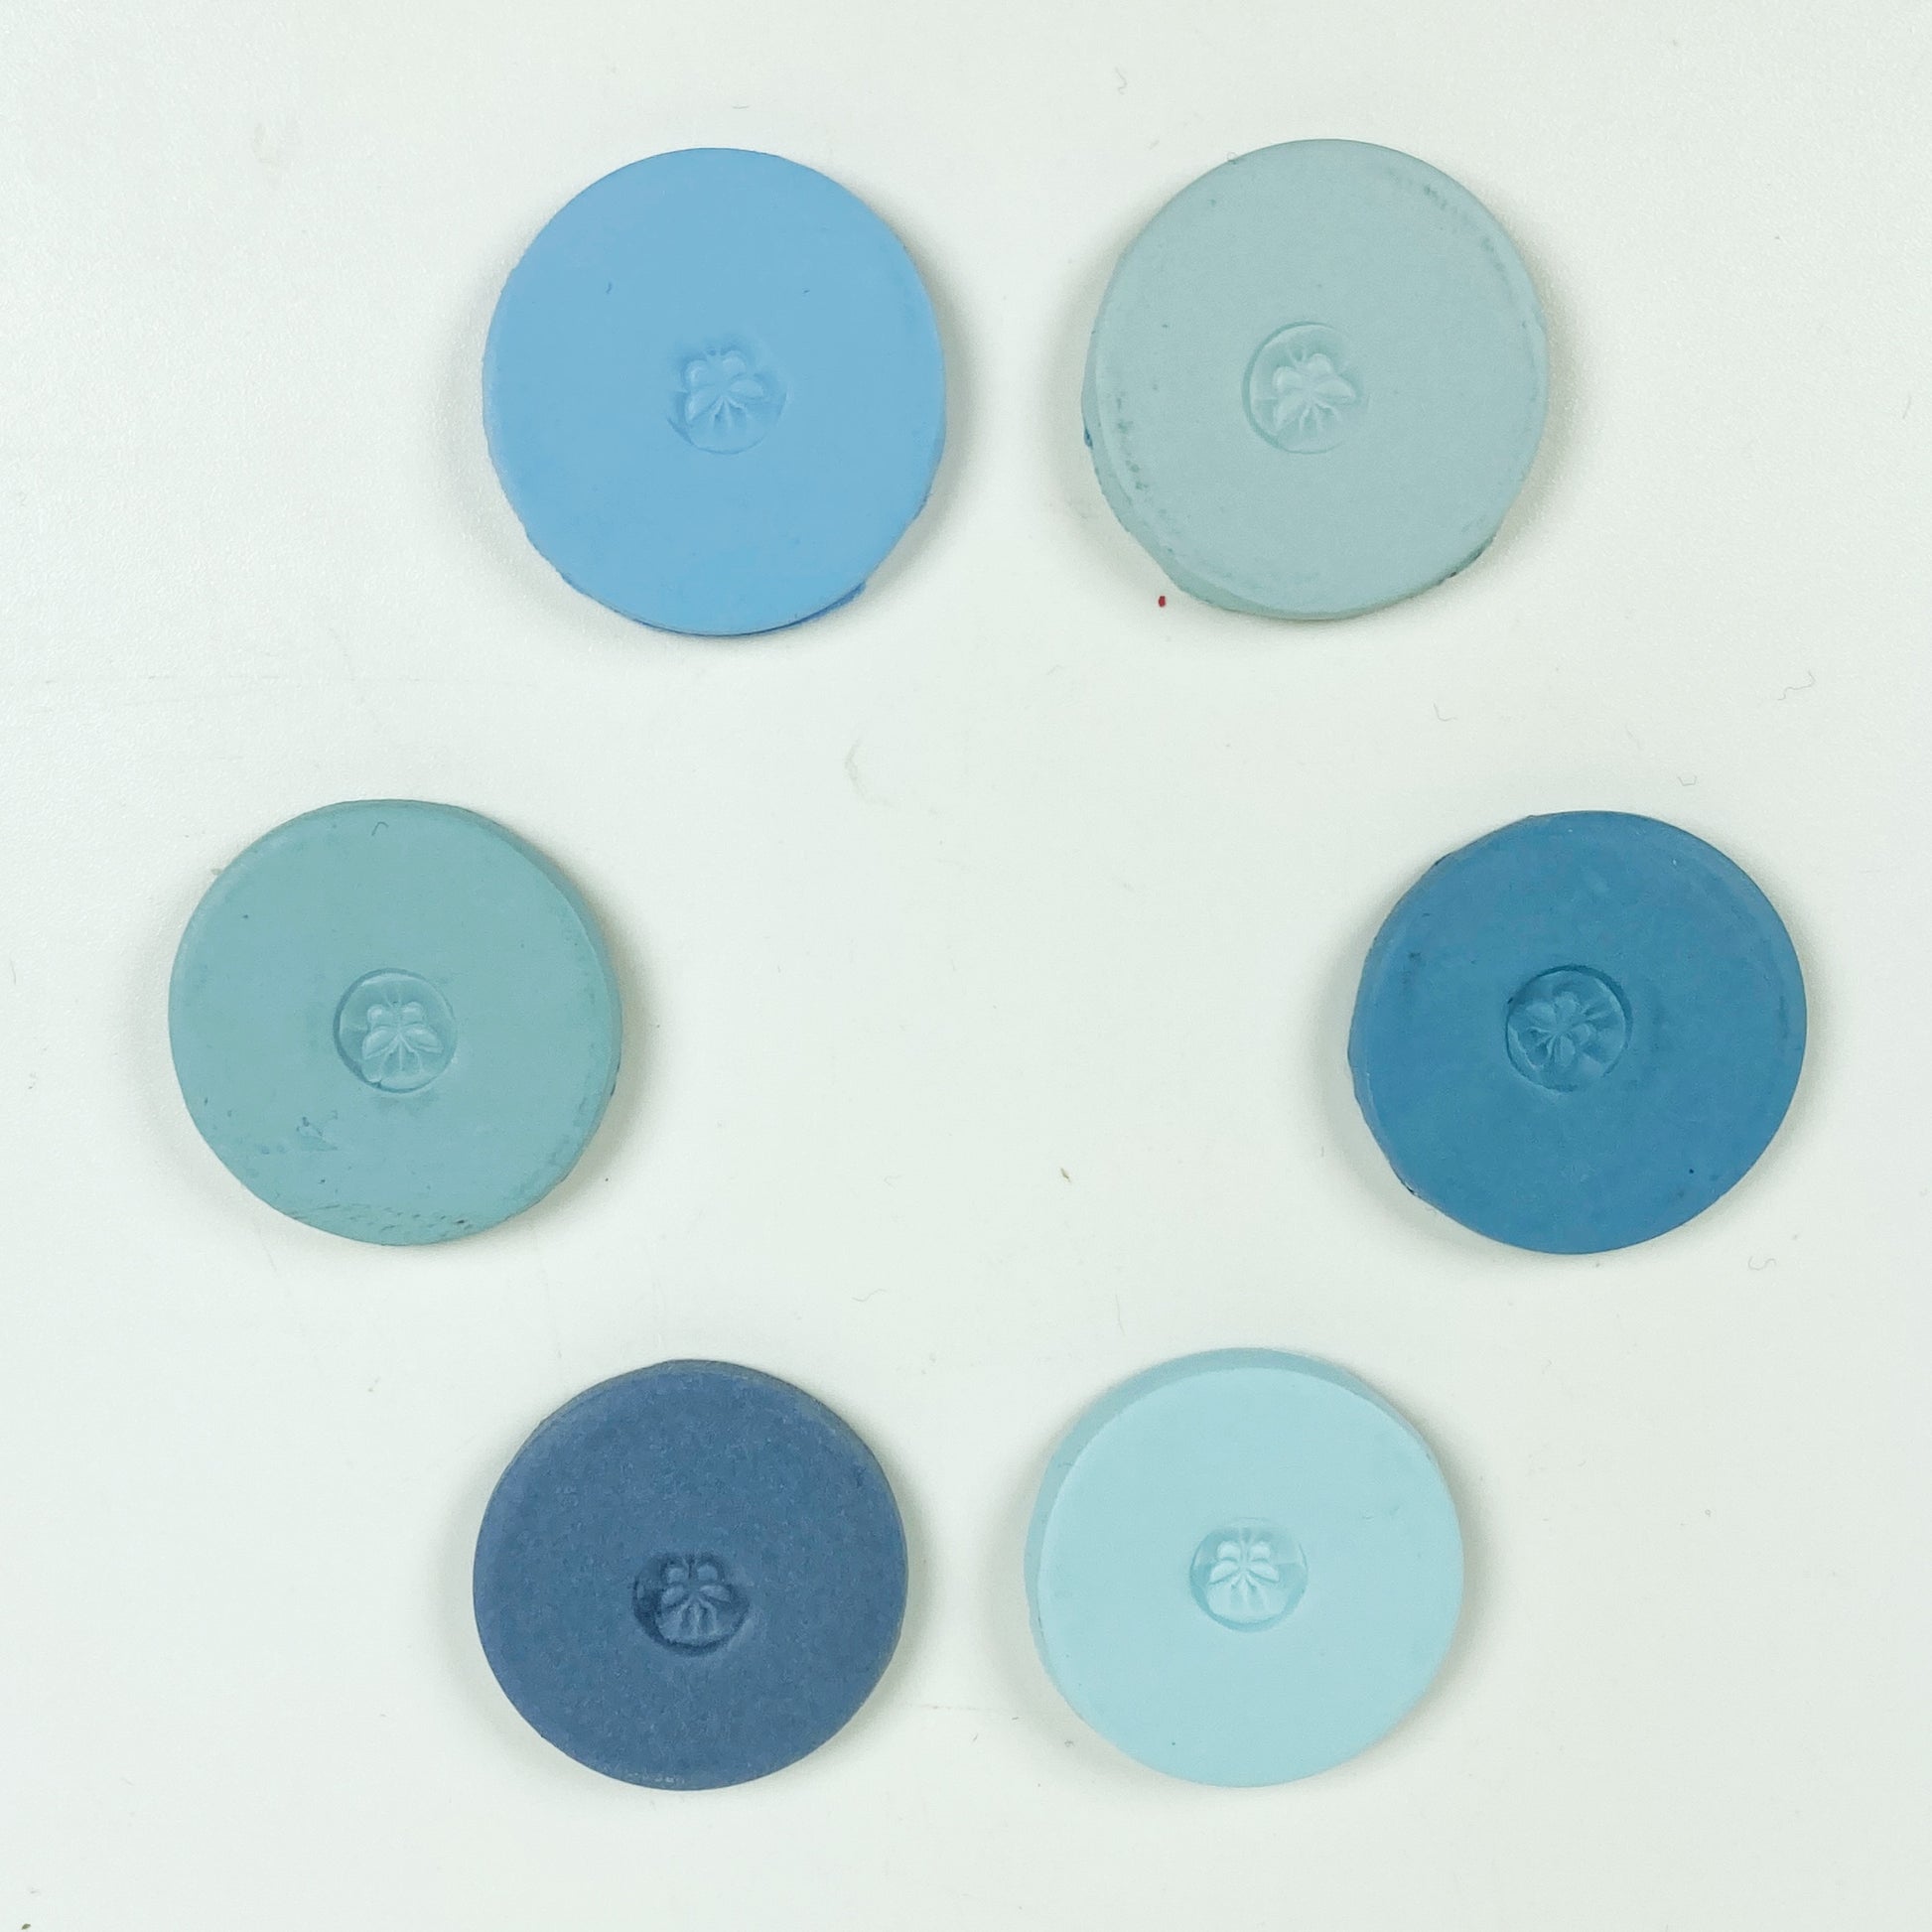 Lake Waters Palette - a circular arrangement of small discs in all 6 colors